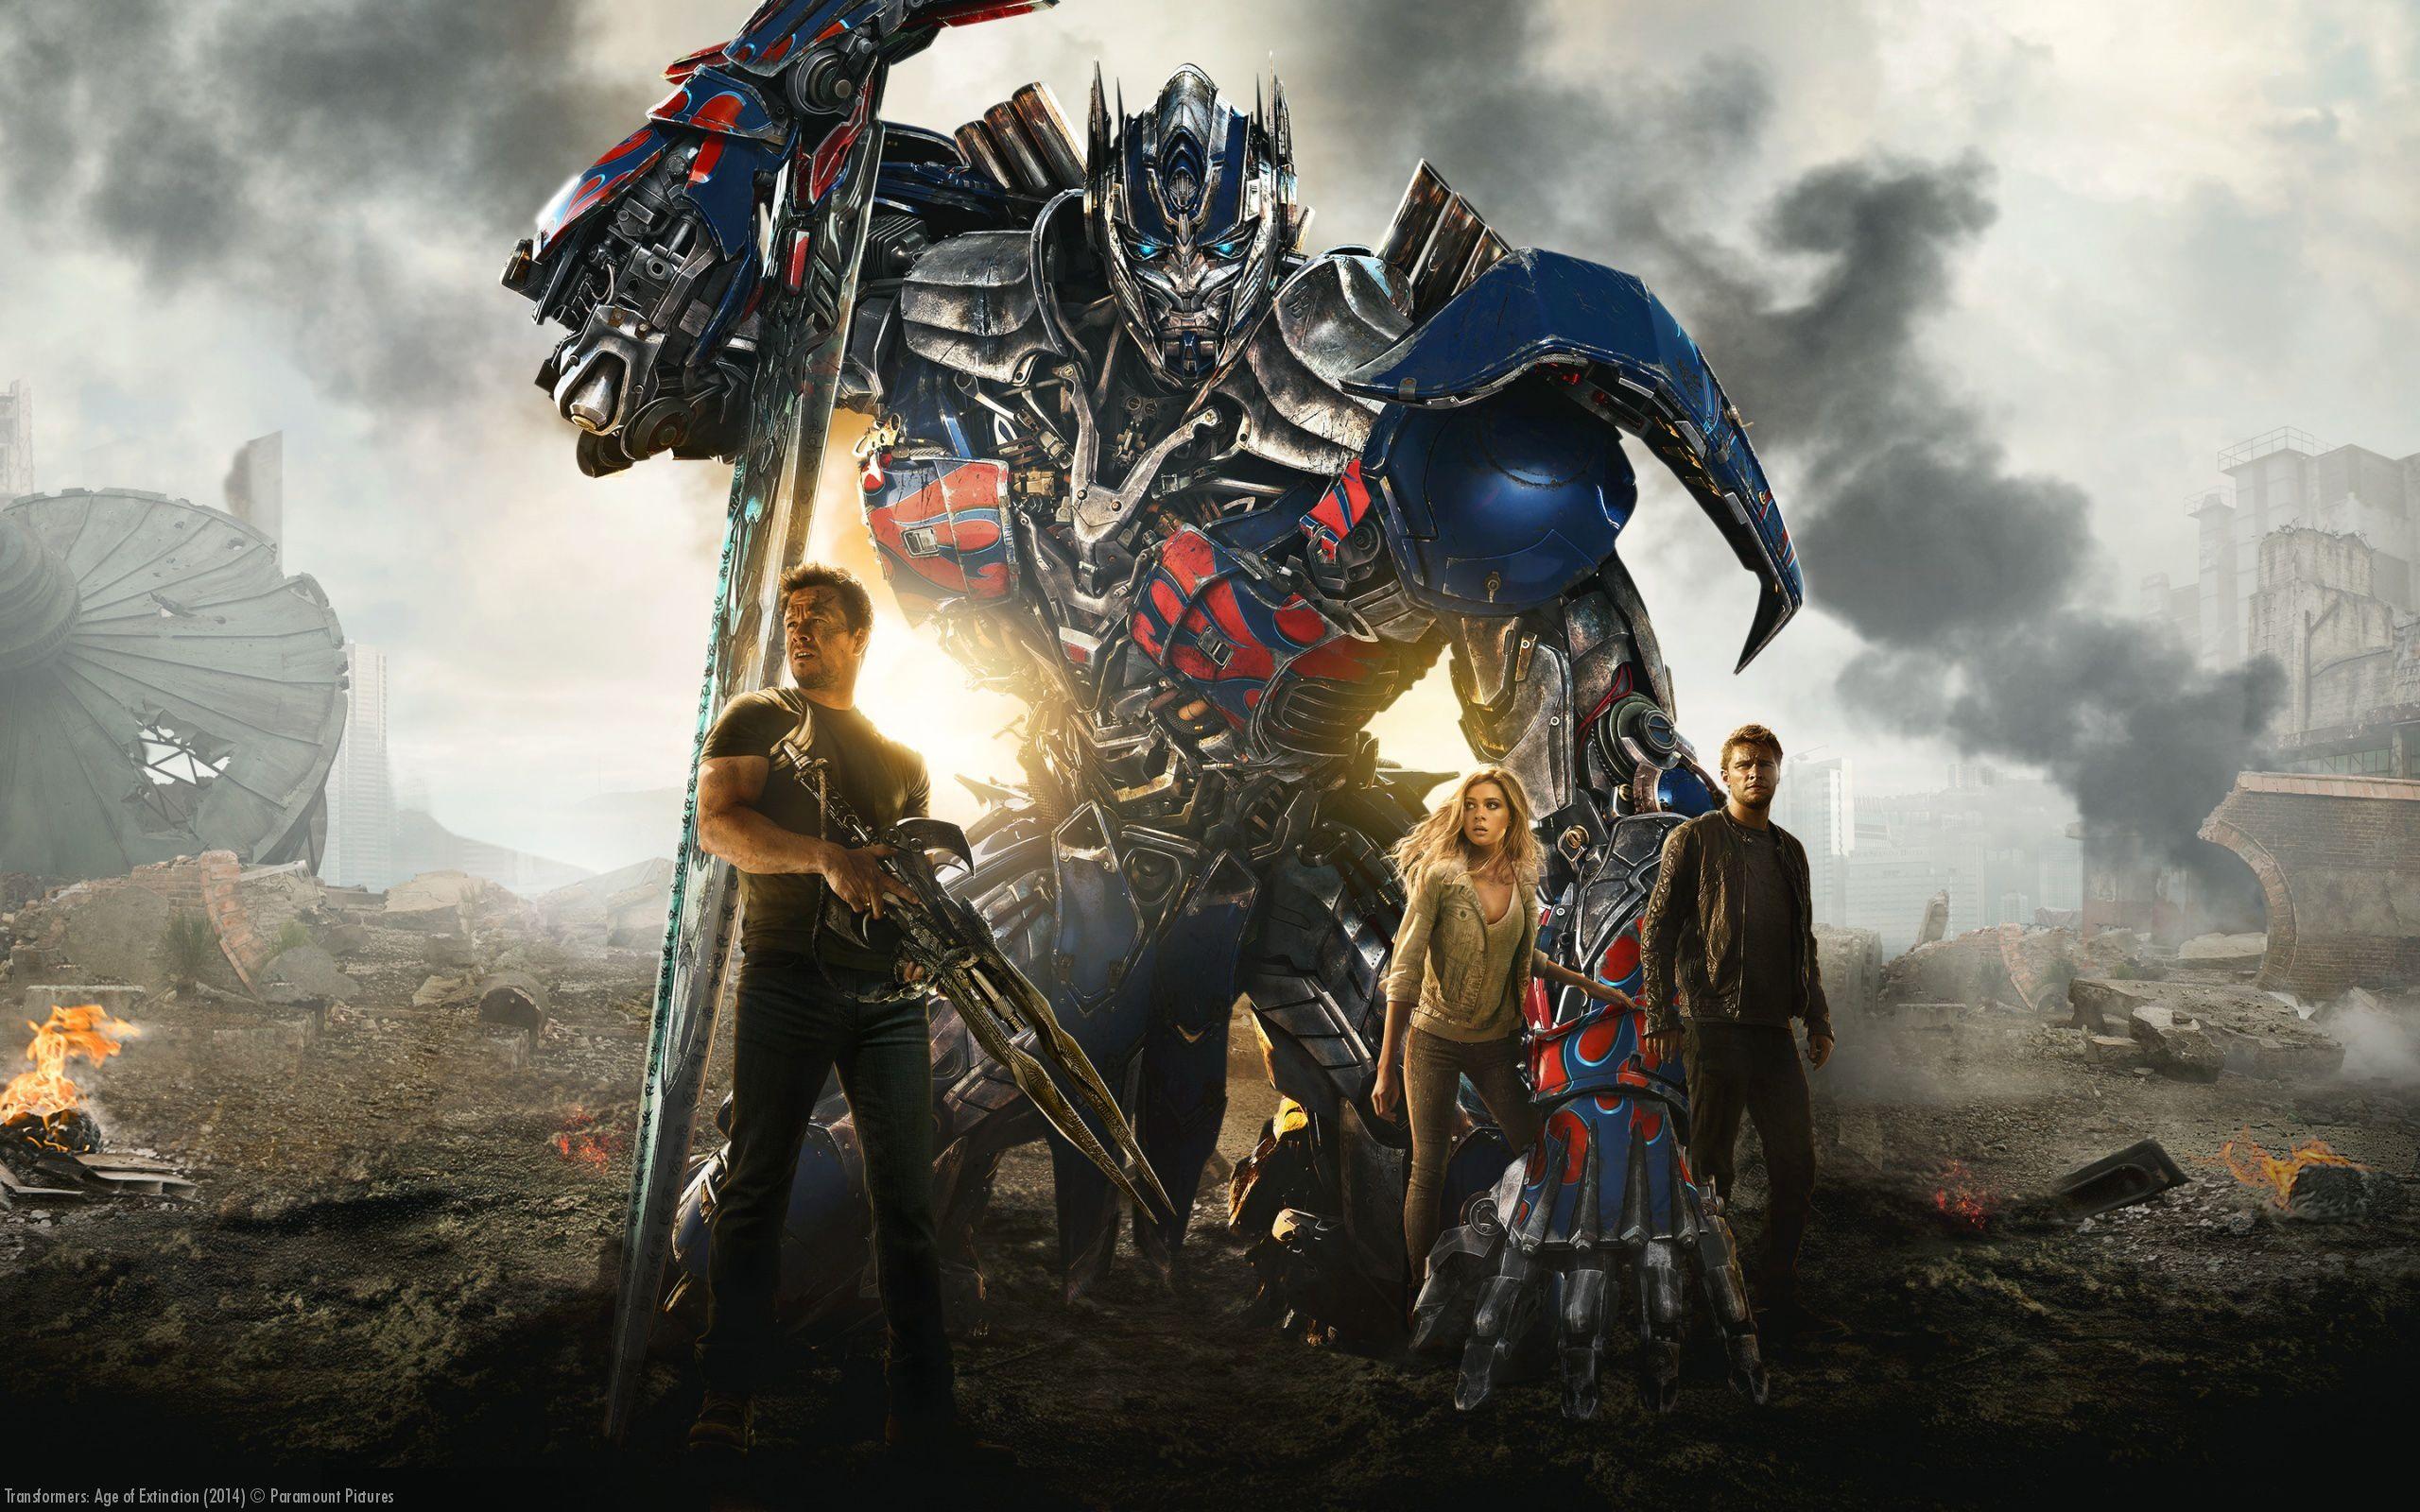 transformers age of extinction 4k